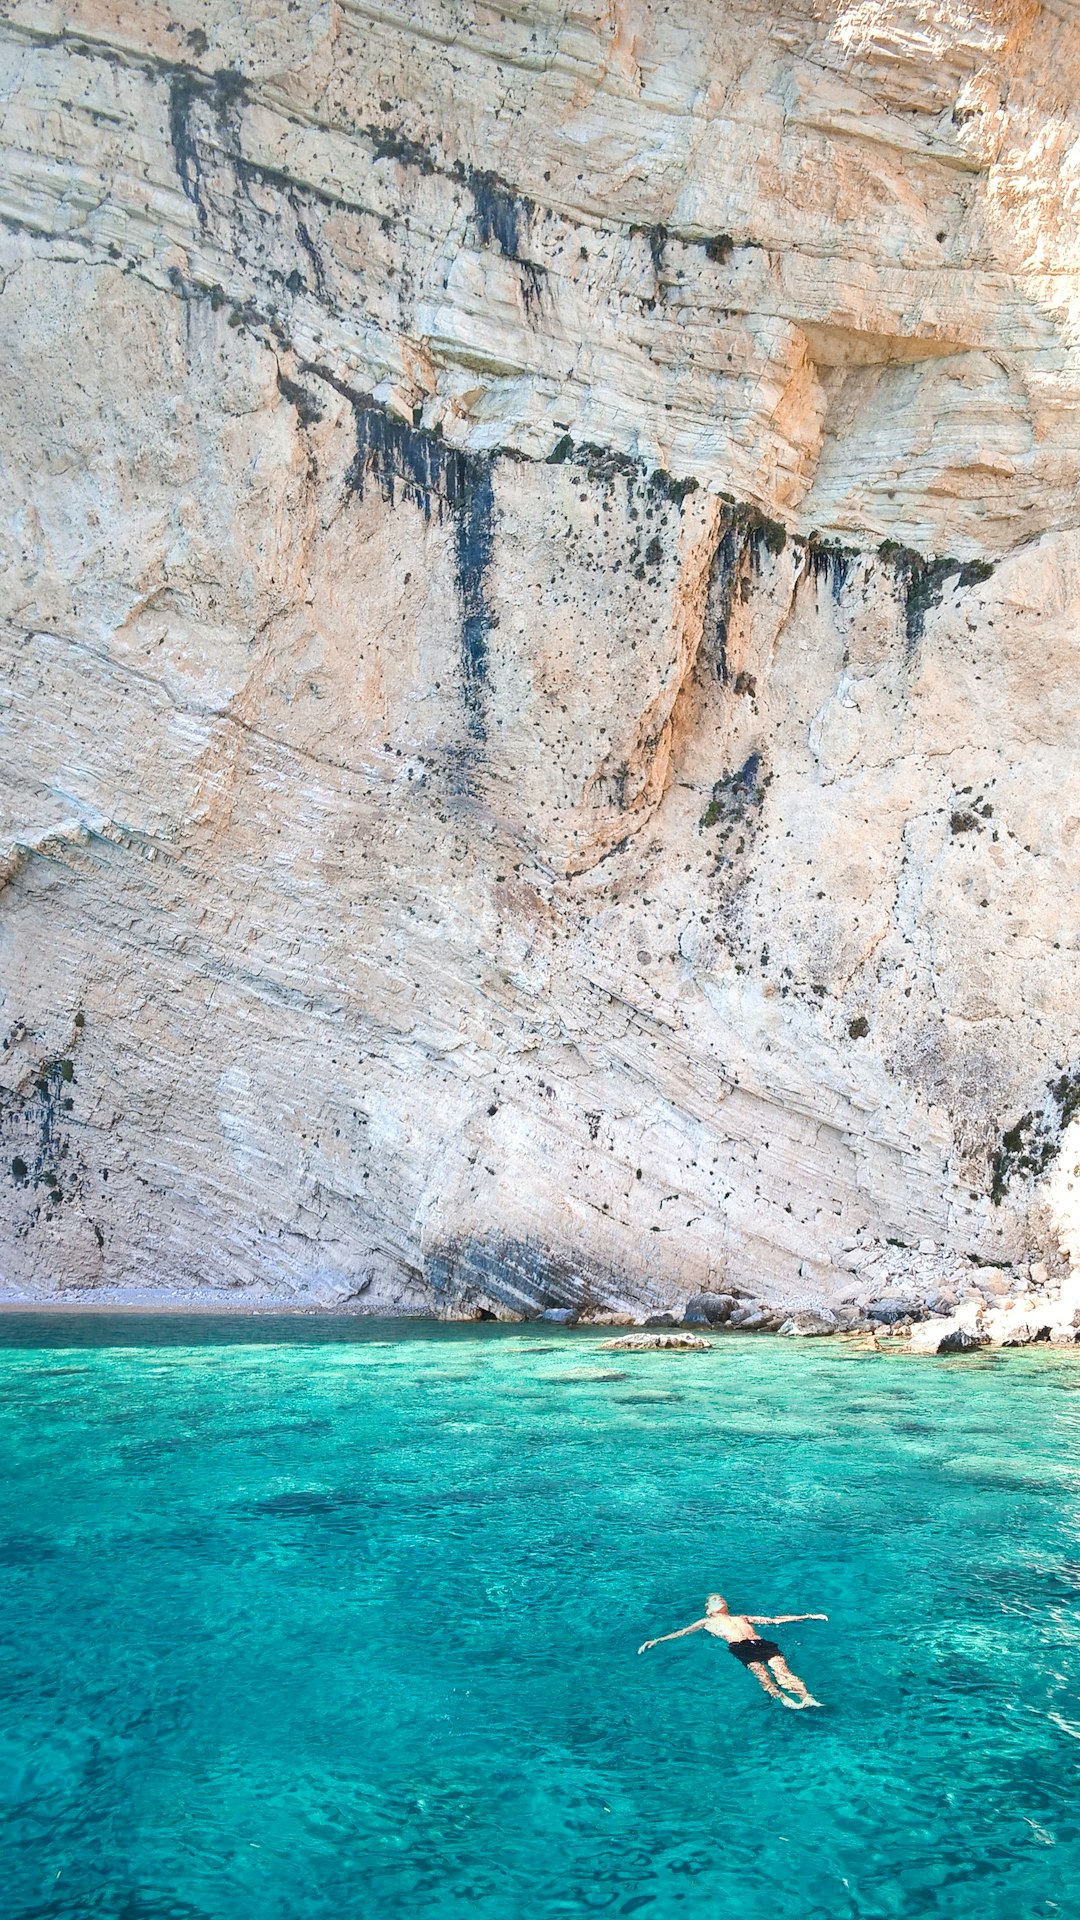 Travel Tips and Stories of Zakynthos in Greece